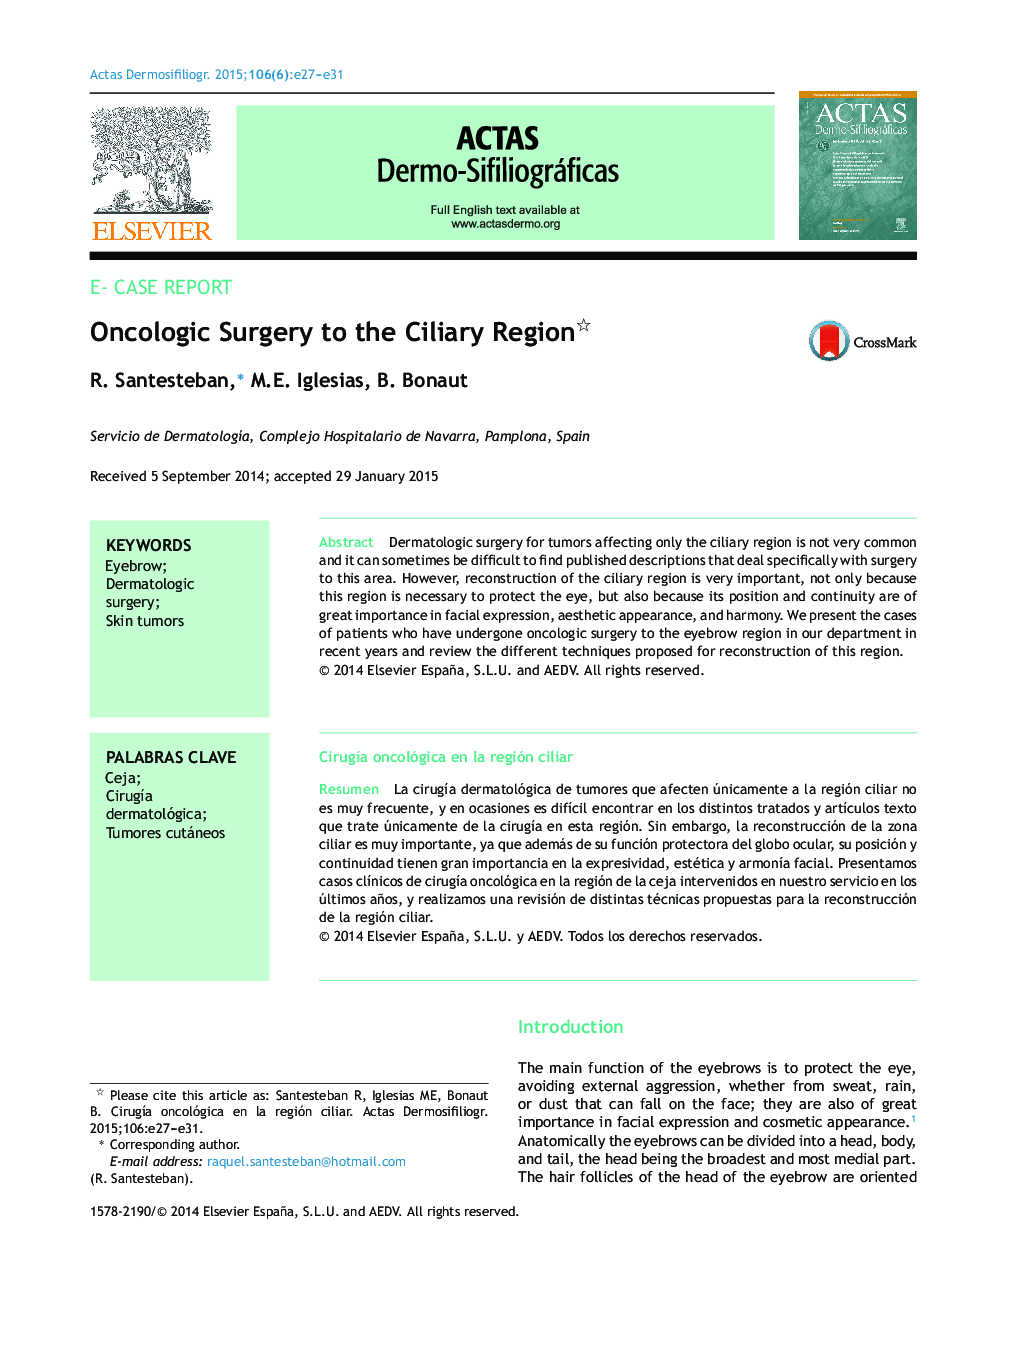 Oncologic Surgery to the Ciliary Region